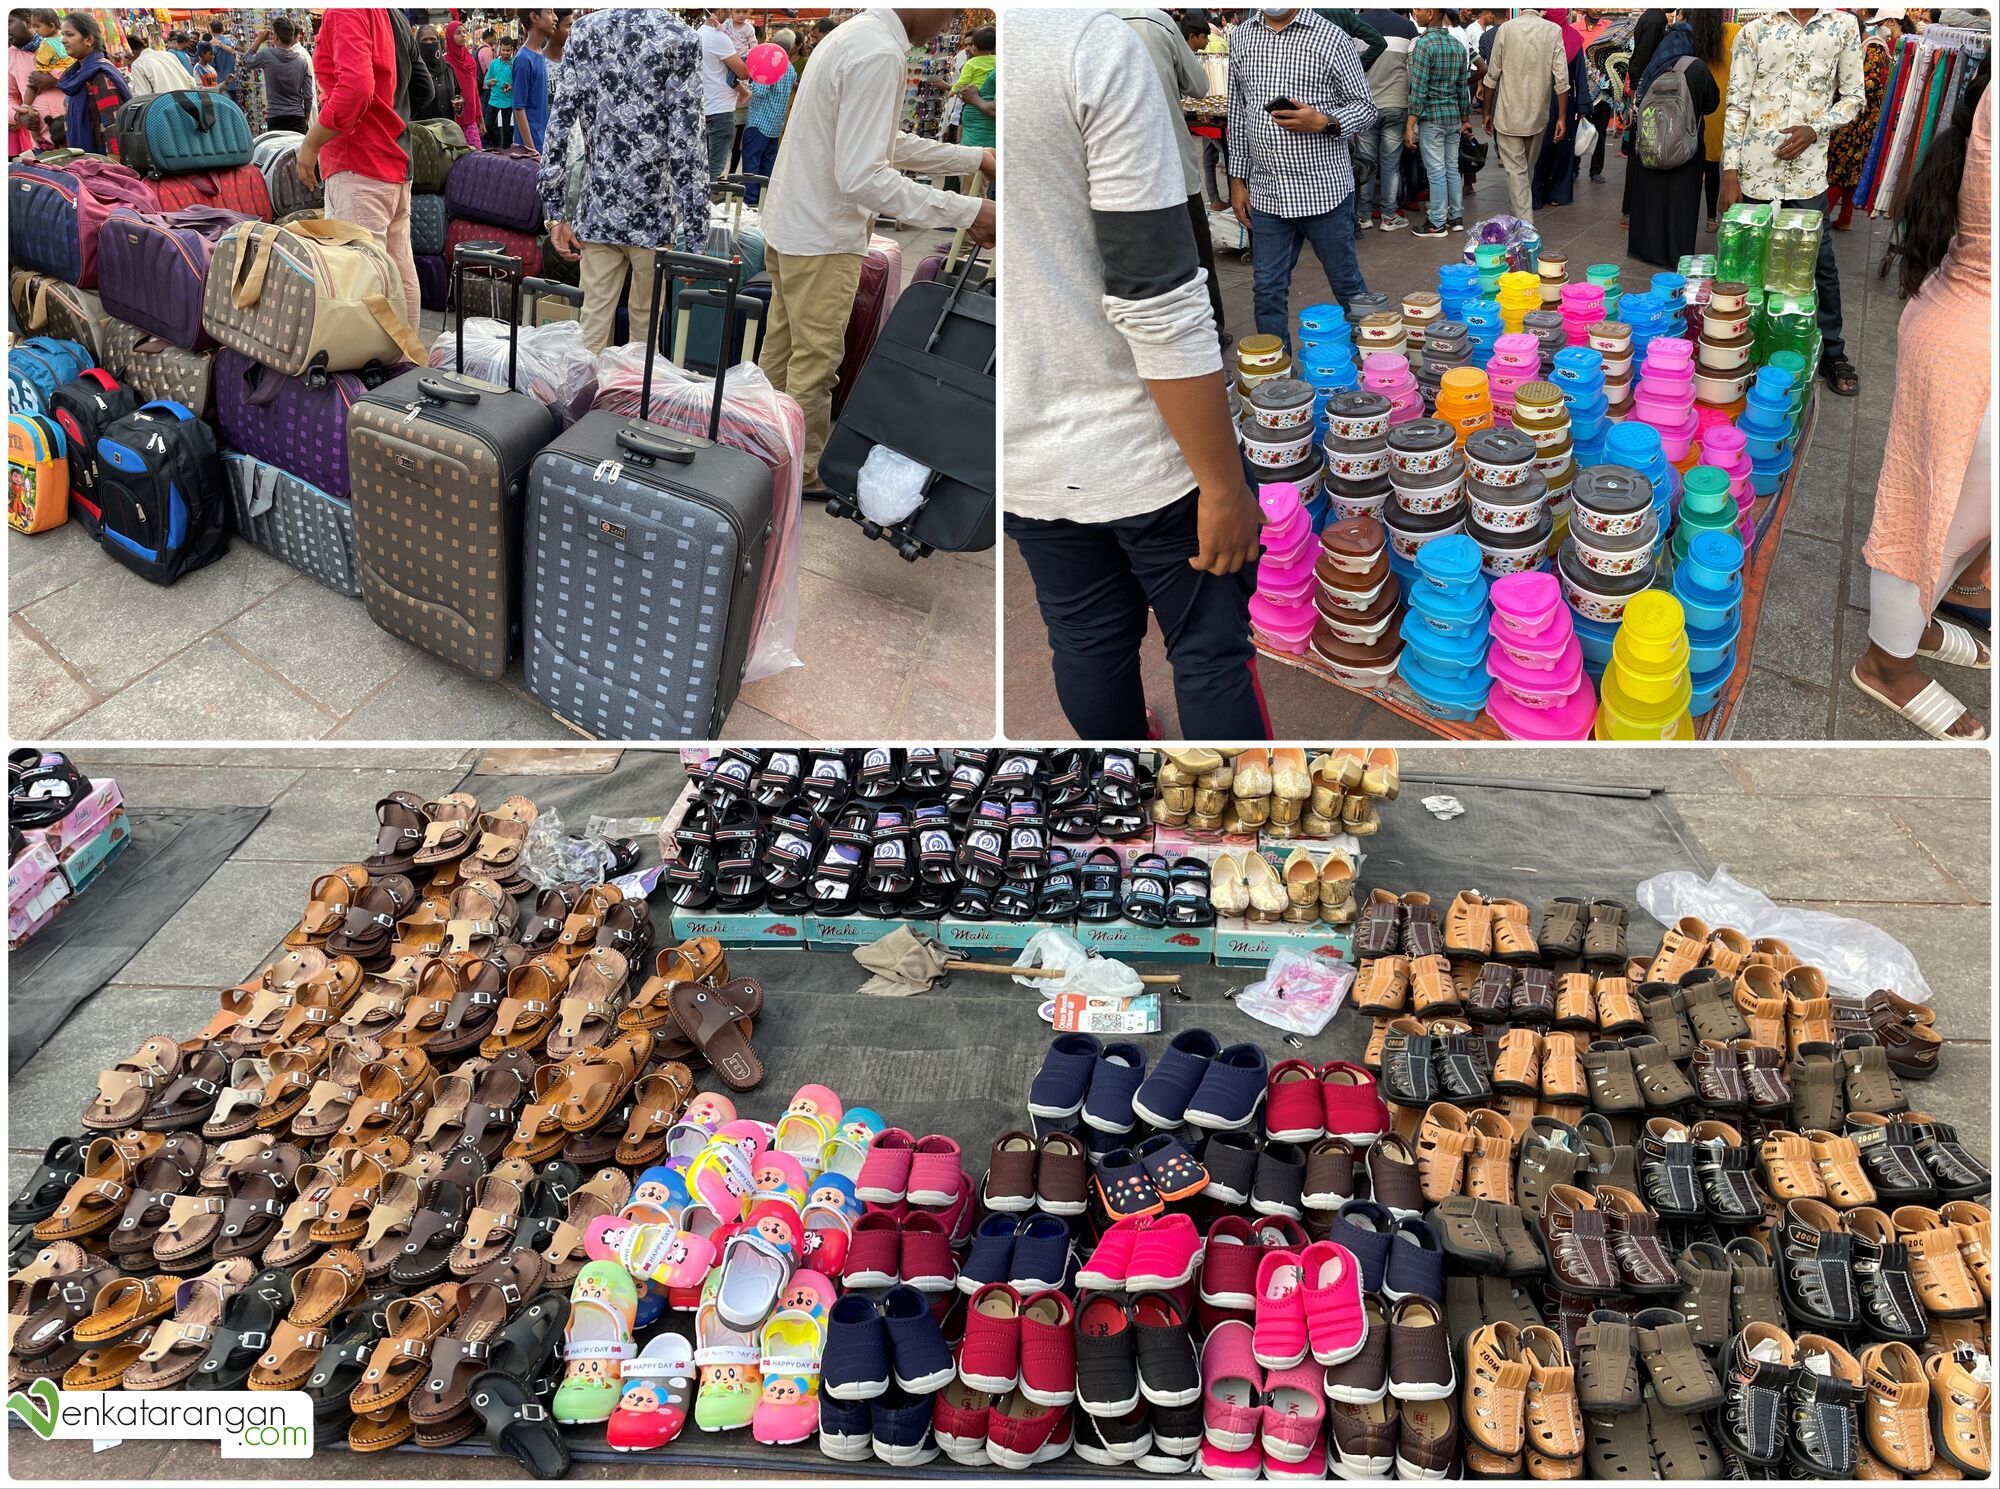 Shops near Charminar selling travel suitcases, storage plastic containers, and baby shoes